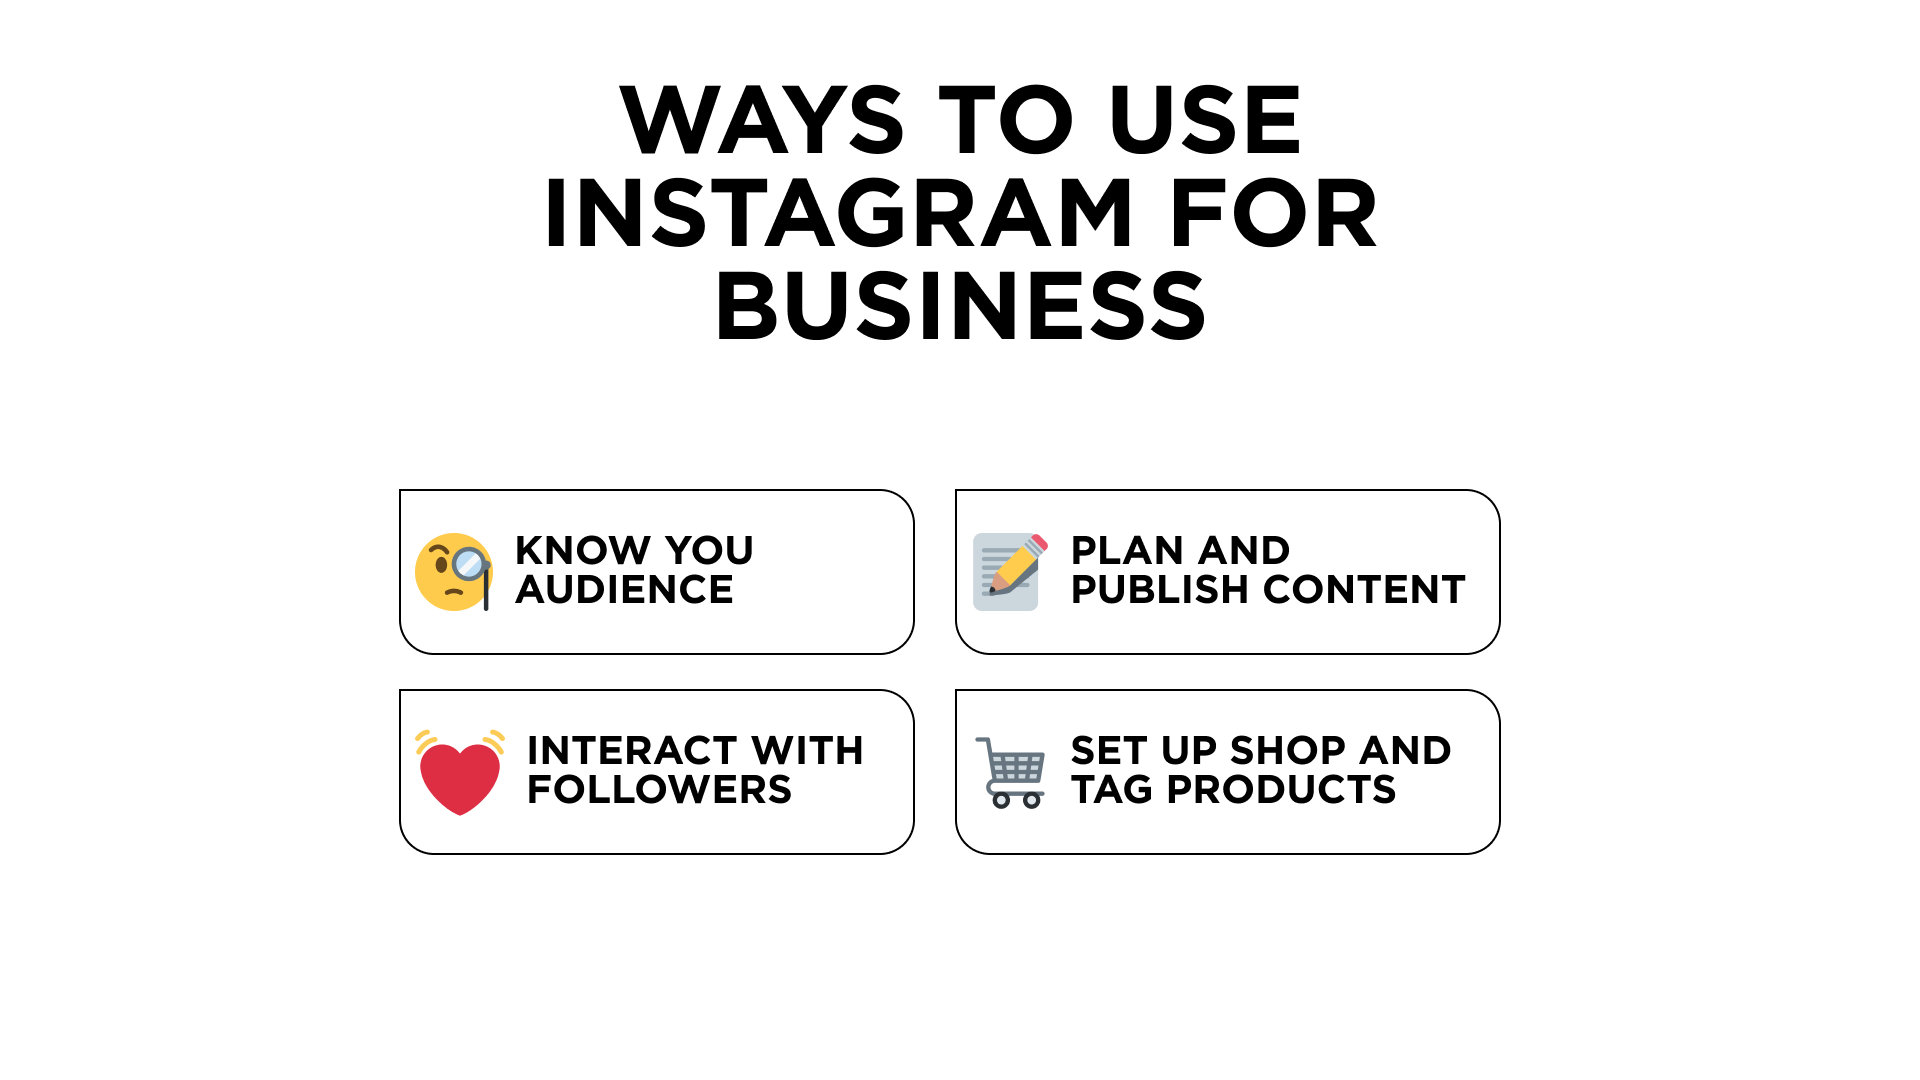 Ways to Use Instagram for Business